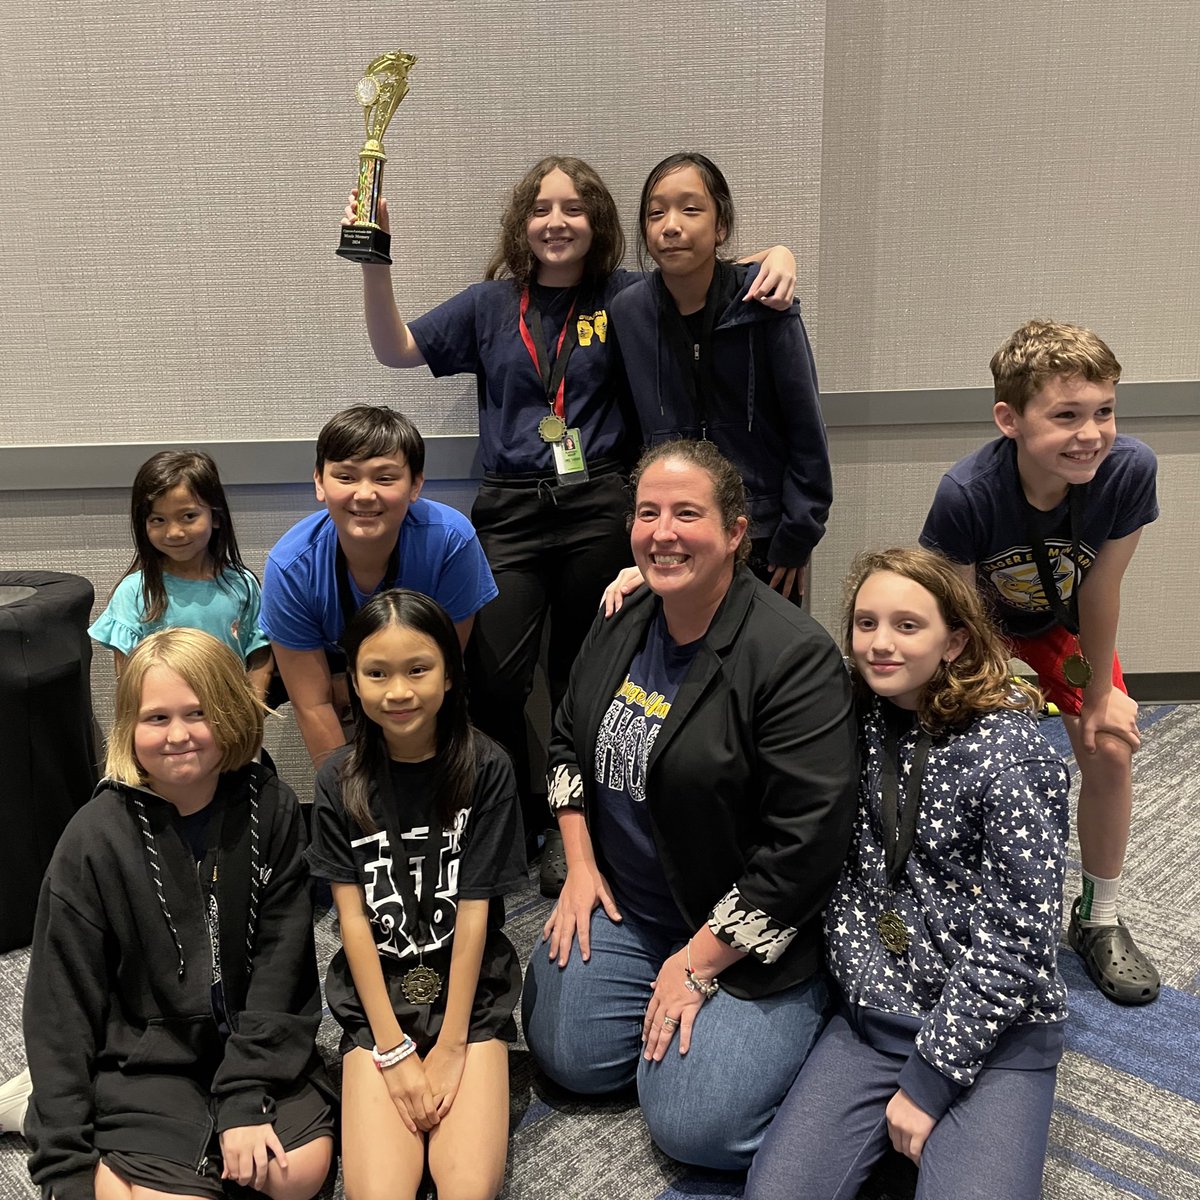 We’re bringing home the GOLD!!! These students represented Yeager at the District Level Music Memory Competition. They competed against students from Elementary Schools all over the district! Way to go Kathryn, Kyle, Kaila, Jackson, Juli, Brody, & Megan! #TogetherWeSwarm 🐝💛